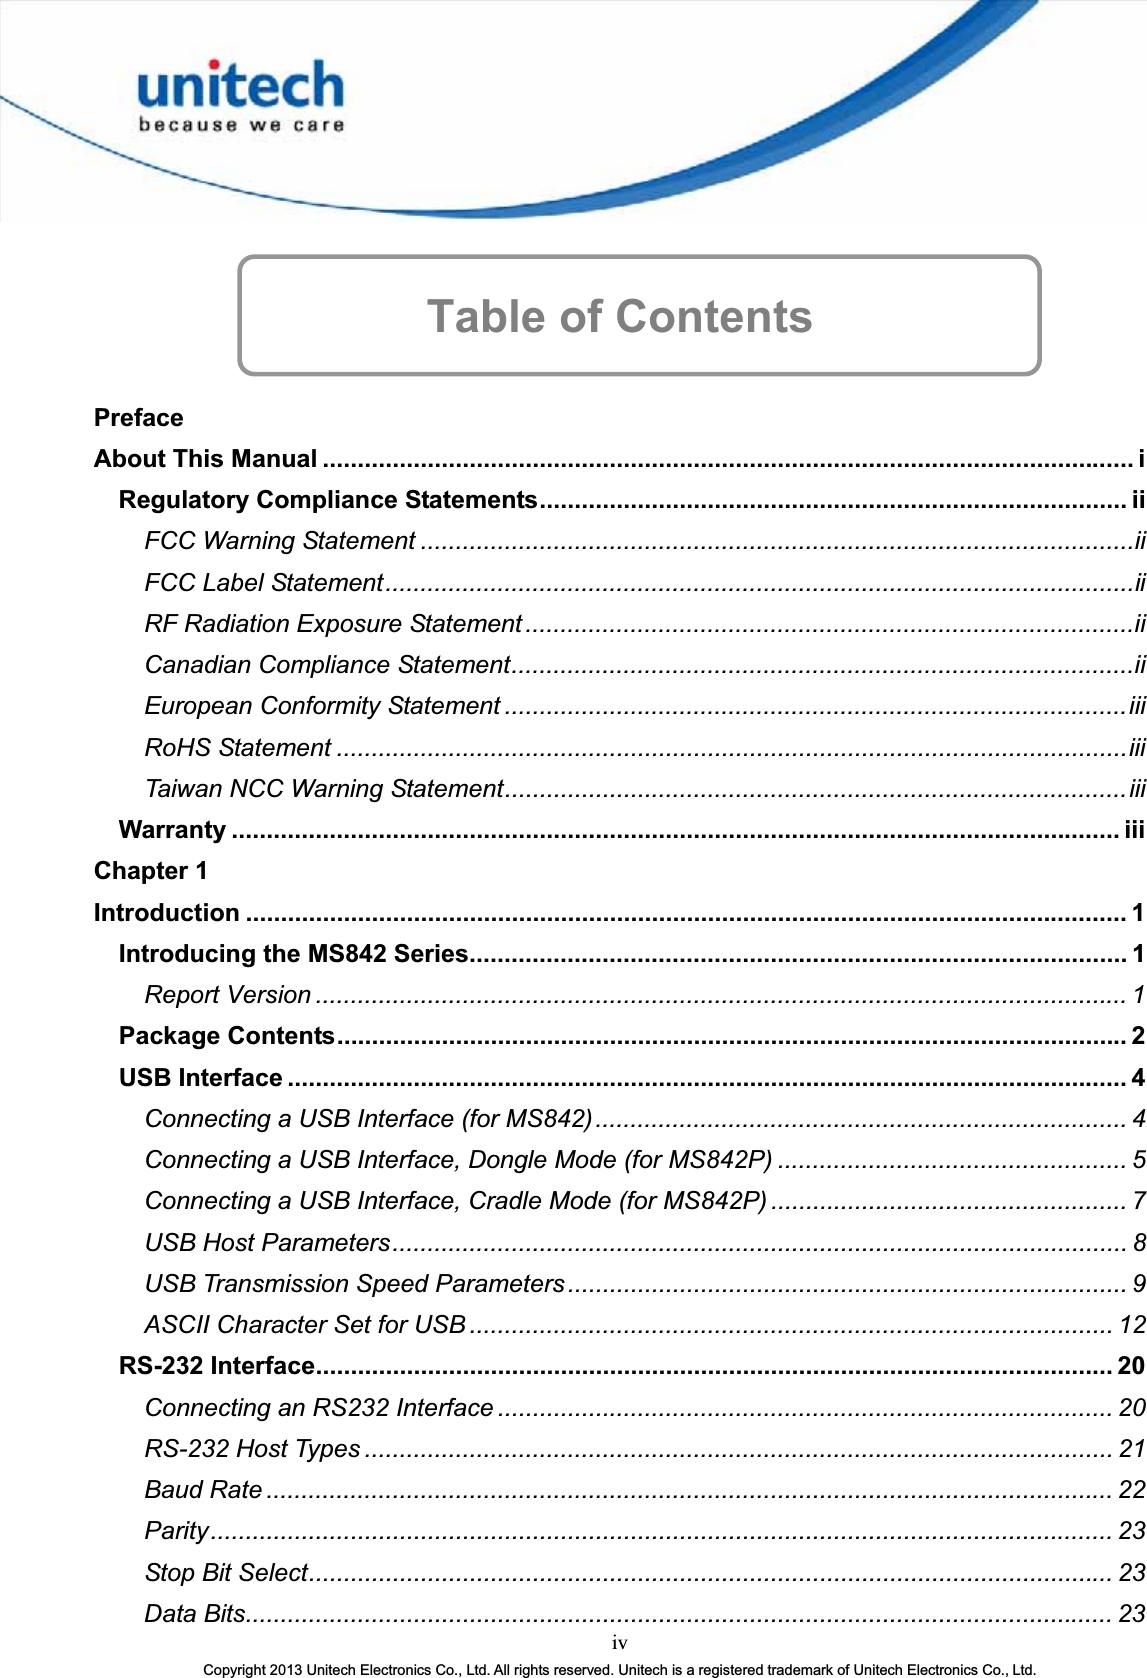 Table of Contents PrefaceAbout This Manual .................................................................................................................... iRegulatory Compliance Statements.................................................................................... iiFCC Warning Statement ......................................................................................................iiFCC Label Statement...........................................................................................................iiRF Radiation Exposure Statement .......................................................................................iiCanadian Compliance Statement.........................................................................................iiEuropean Conformity Statement .........................................................................................iiiRoHS Statement .................................................................................................................iiiTaiwan NCC Warning Statement.........................................................................................iiiWarranty ............................................................................................................................... iiiChapter 1 Introduction .............................................................................................................................. 1Introducing the MS842 Series.............................................................................................. 1Report Version .................................................................................................................... 1Package Contents................................................................................................................. 2USB Interface ........................................................................................................................ 4Connecting a USB Interface (for MS842)............................................................................ 4Connecting a USB Interface, Dongle Mode (for MS842P) .................................................. 5Connecting a USB Interface, Cradle Mode (for MS842P) ................................................... 7USB Host Parameters......................................................................................................... 8USB Transmission Speed Parameters................................................................................ 9ASCII Character Set for USB ............................................................................................ 12RS-232 Interface.................................................................................................................. 20Connecting an RS232 Interface ........................................................................................ 20RS-232 Host Types ........................................................................................................... 21Baud Rate ......................................................................................................................... 22Parity................................................................................................................................. 23Stop Bit Select................................................................................................................... 23ivCopyright 2013 Unitech Electronics Co., Ltd. All rights reserved. Unitech is a registered trademark of Unitech Electronics Co., Ltd.Data Bits............................................................................................................................ 23